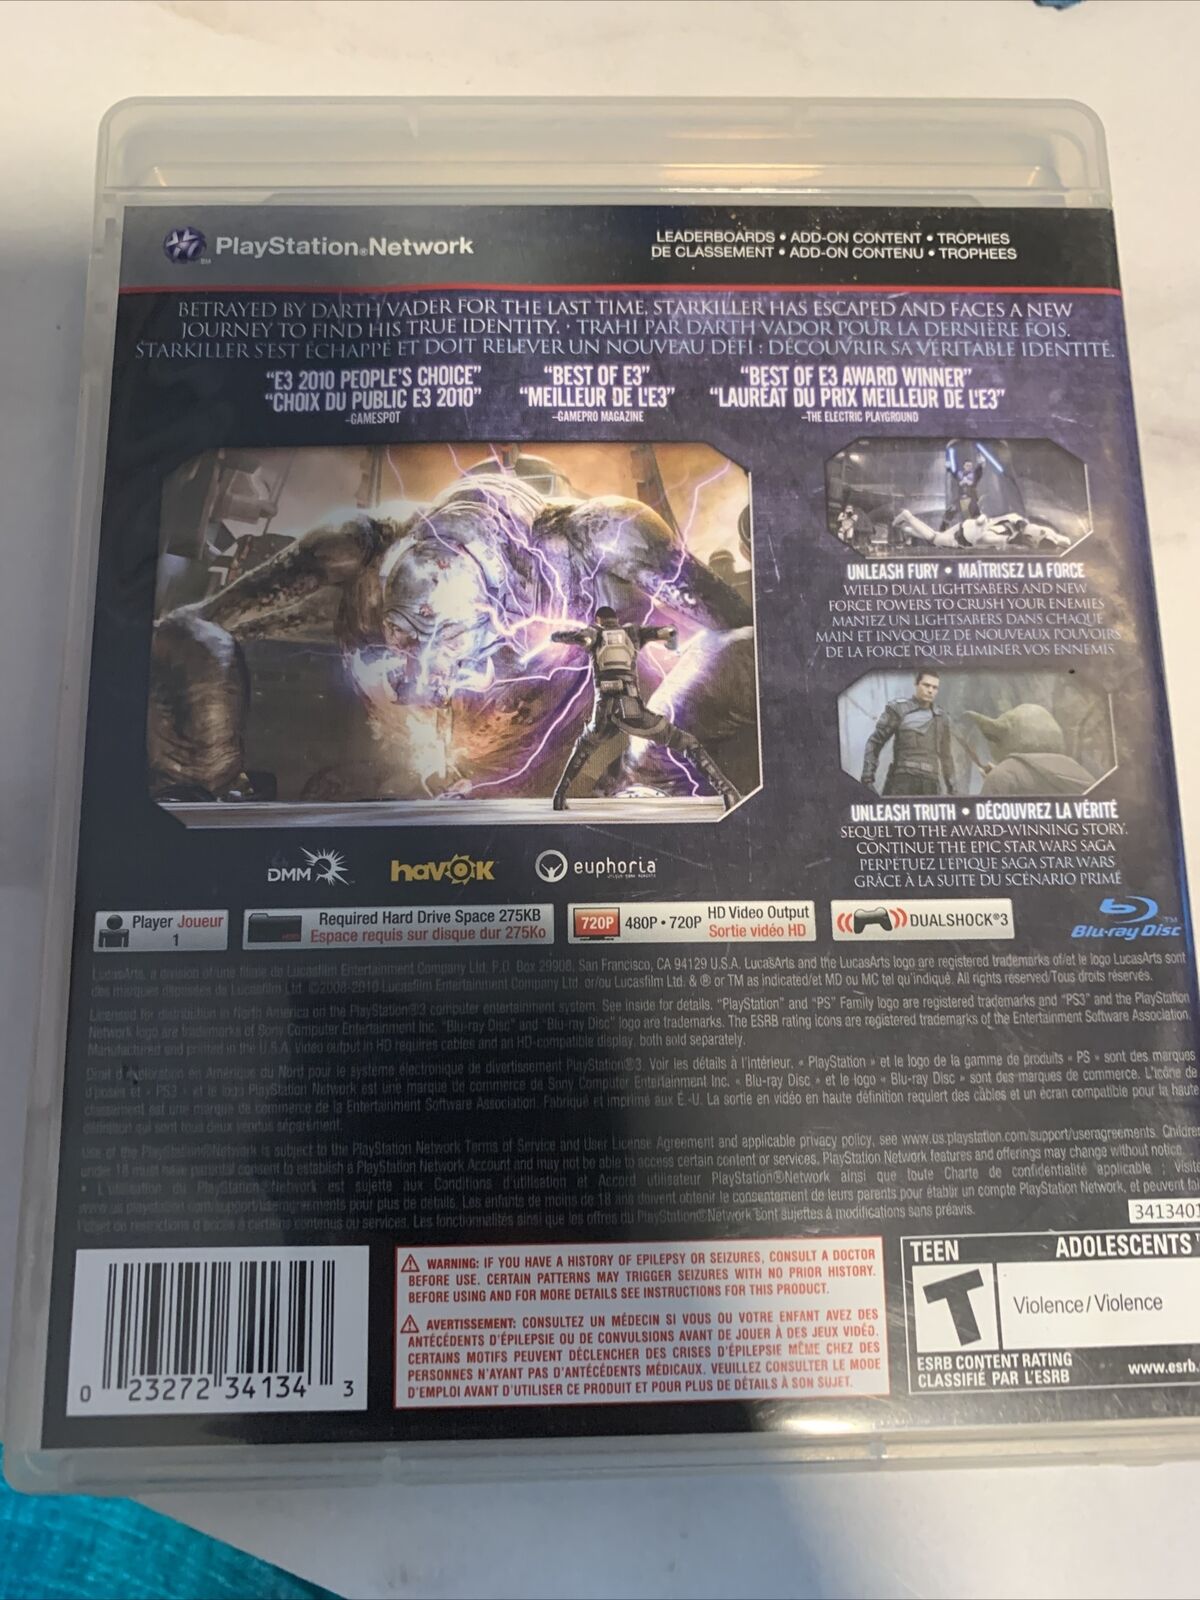 Star Wars: The Force Unleashed II (Sony PlayStation 3, 2010)